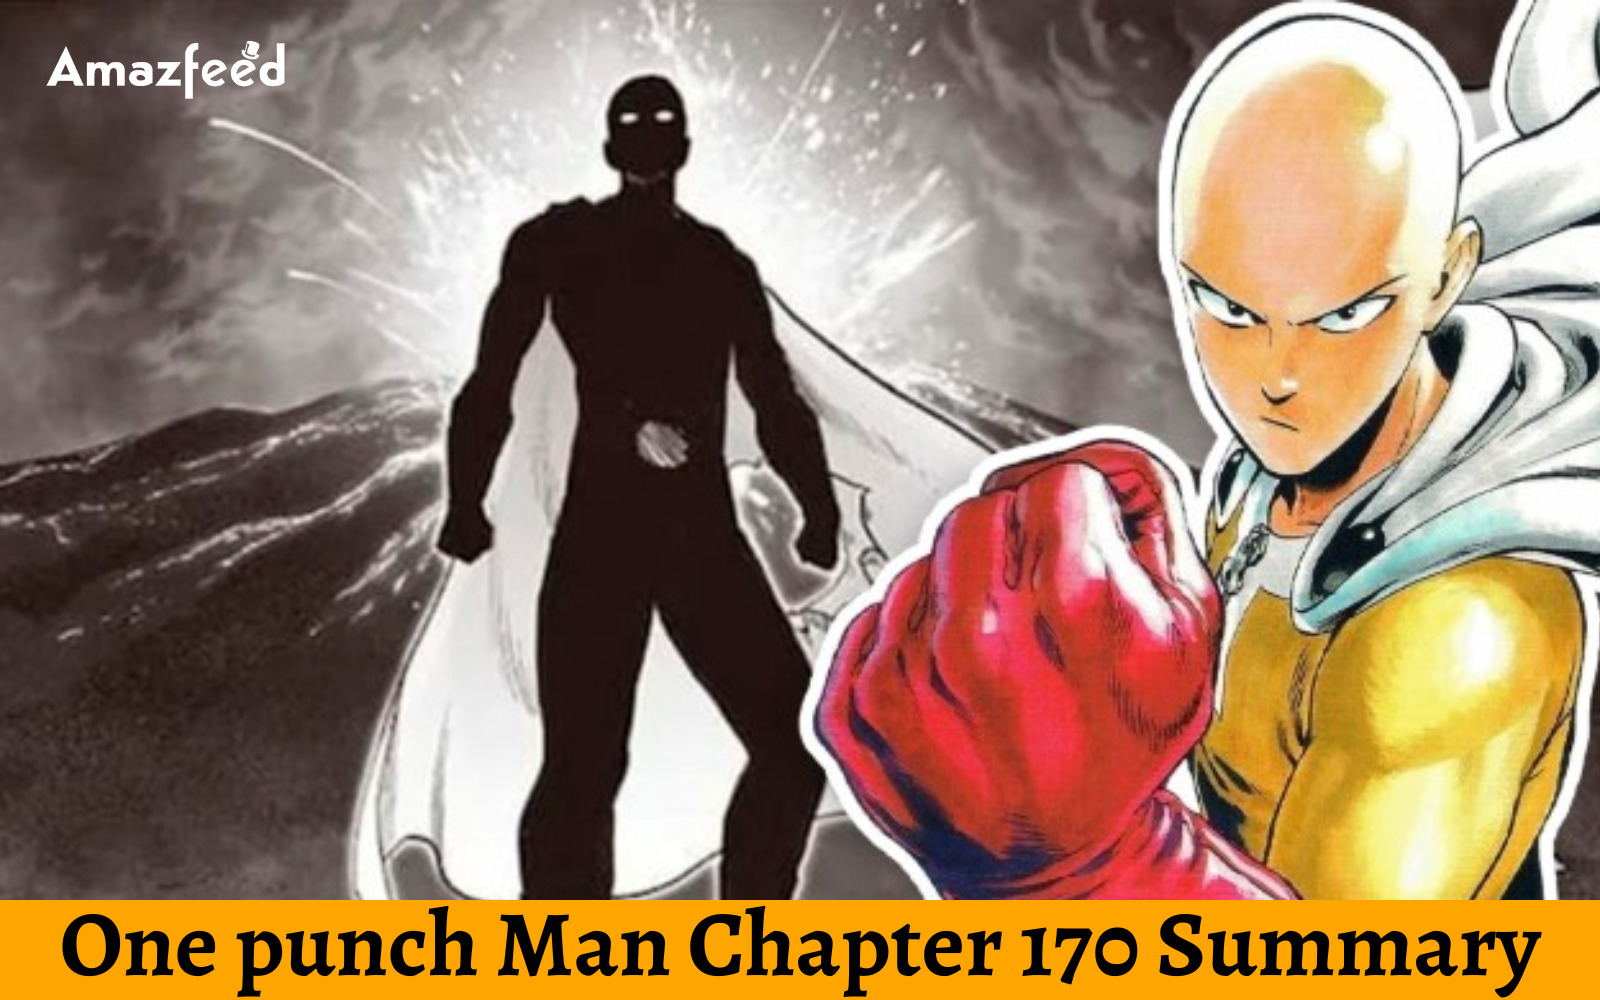 One punch Man Chapter 170 Summary